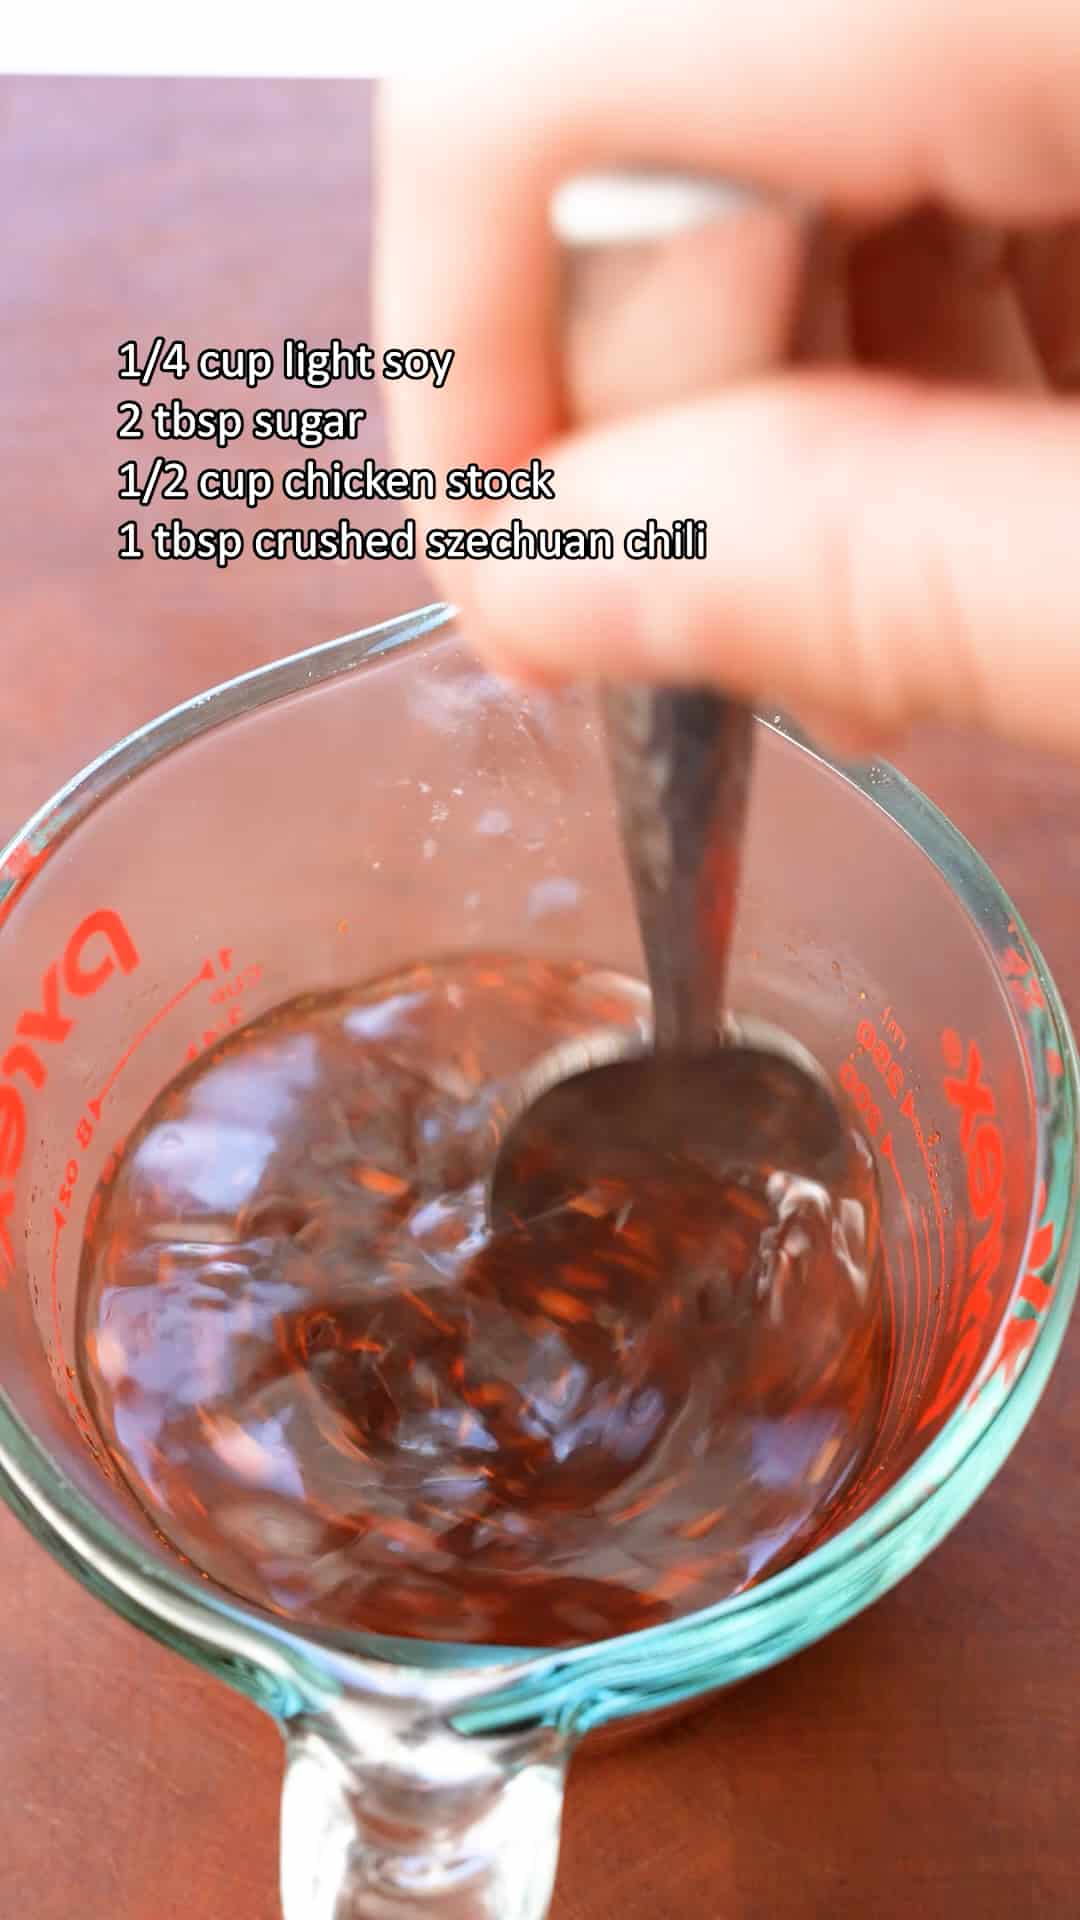 Mixing General Tso's sauce in a glass measuring cup.